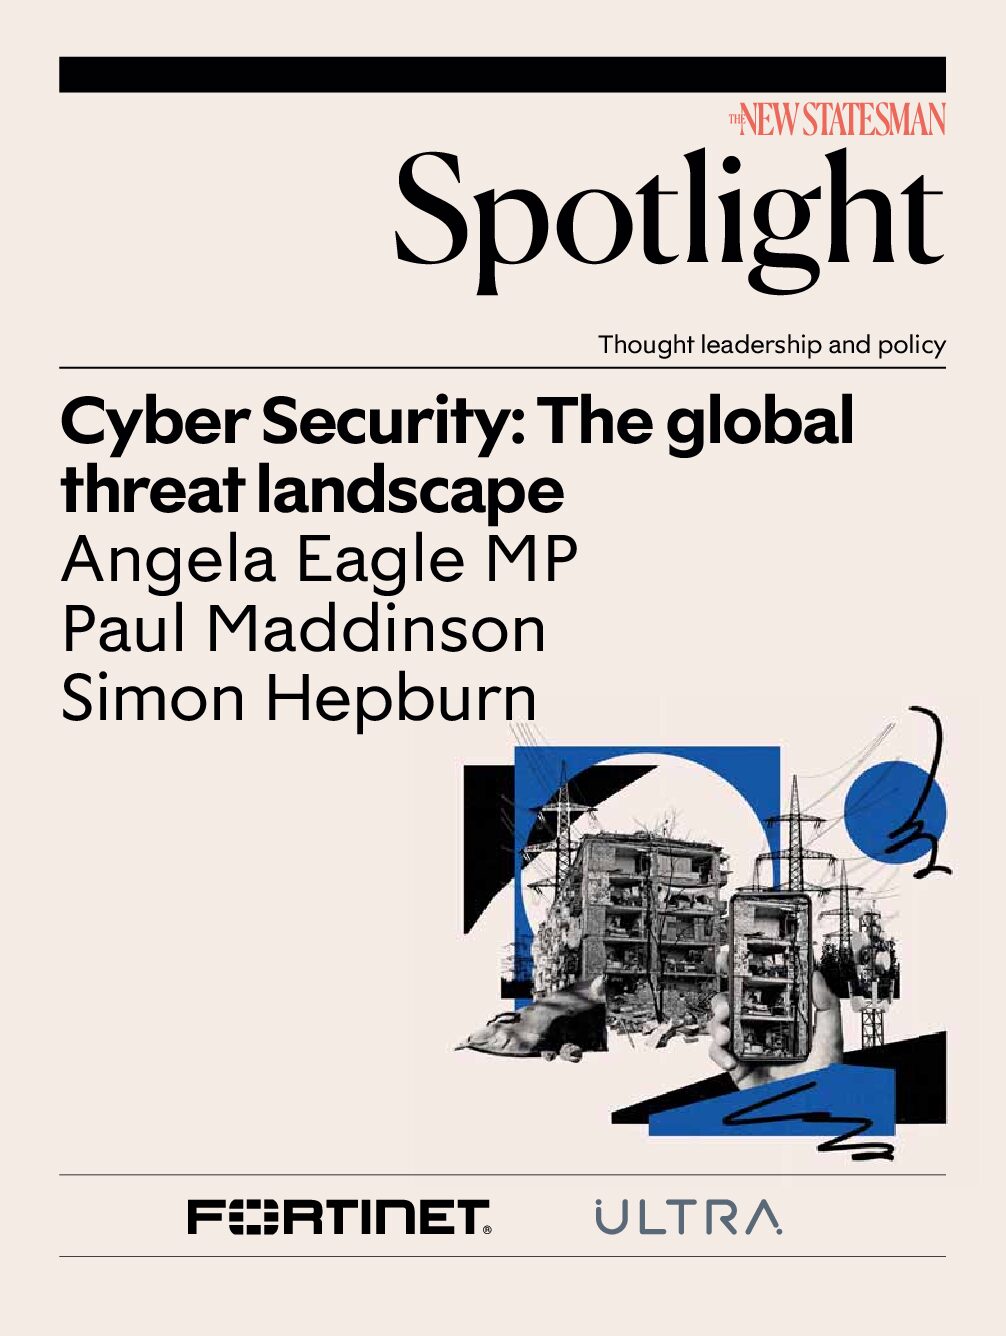 Cyber Security: The global threat landscape